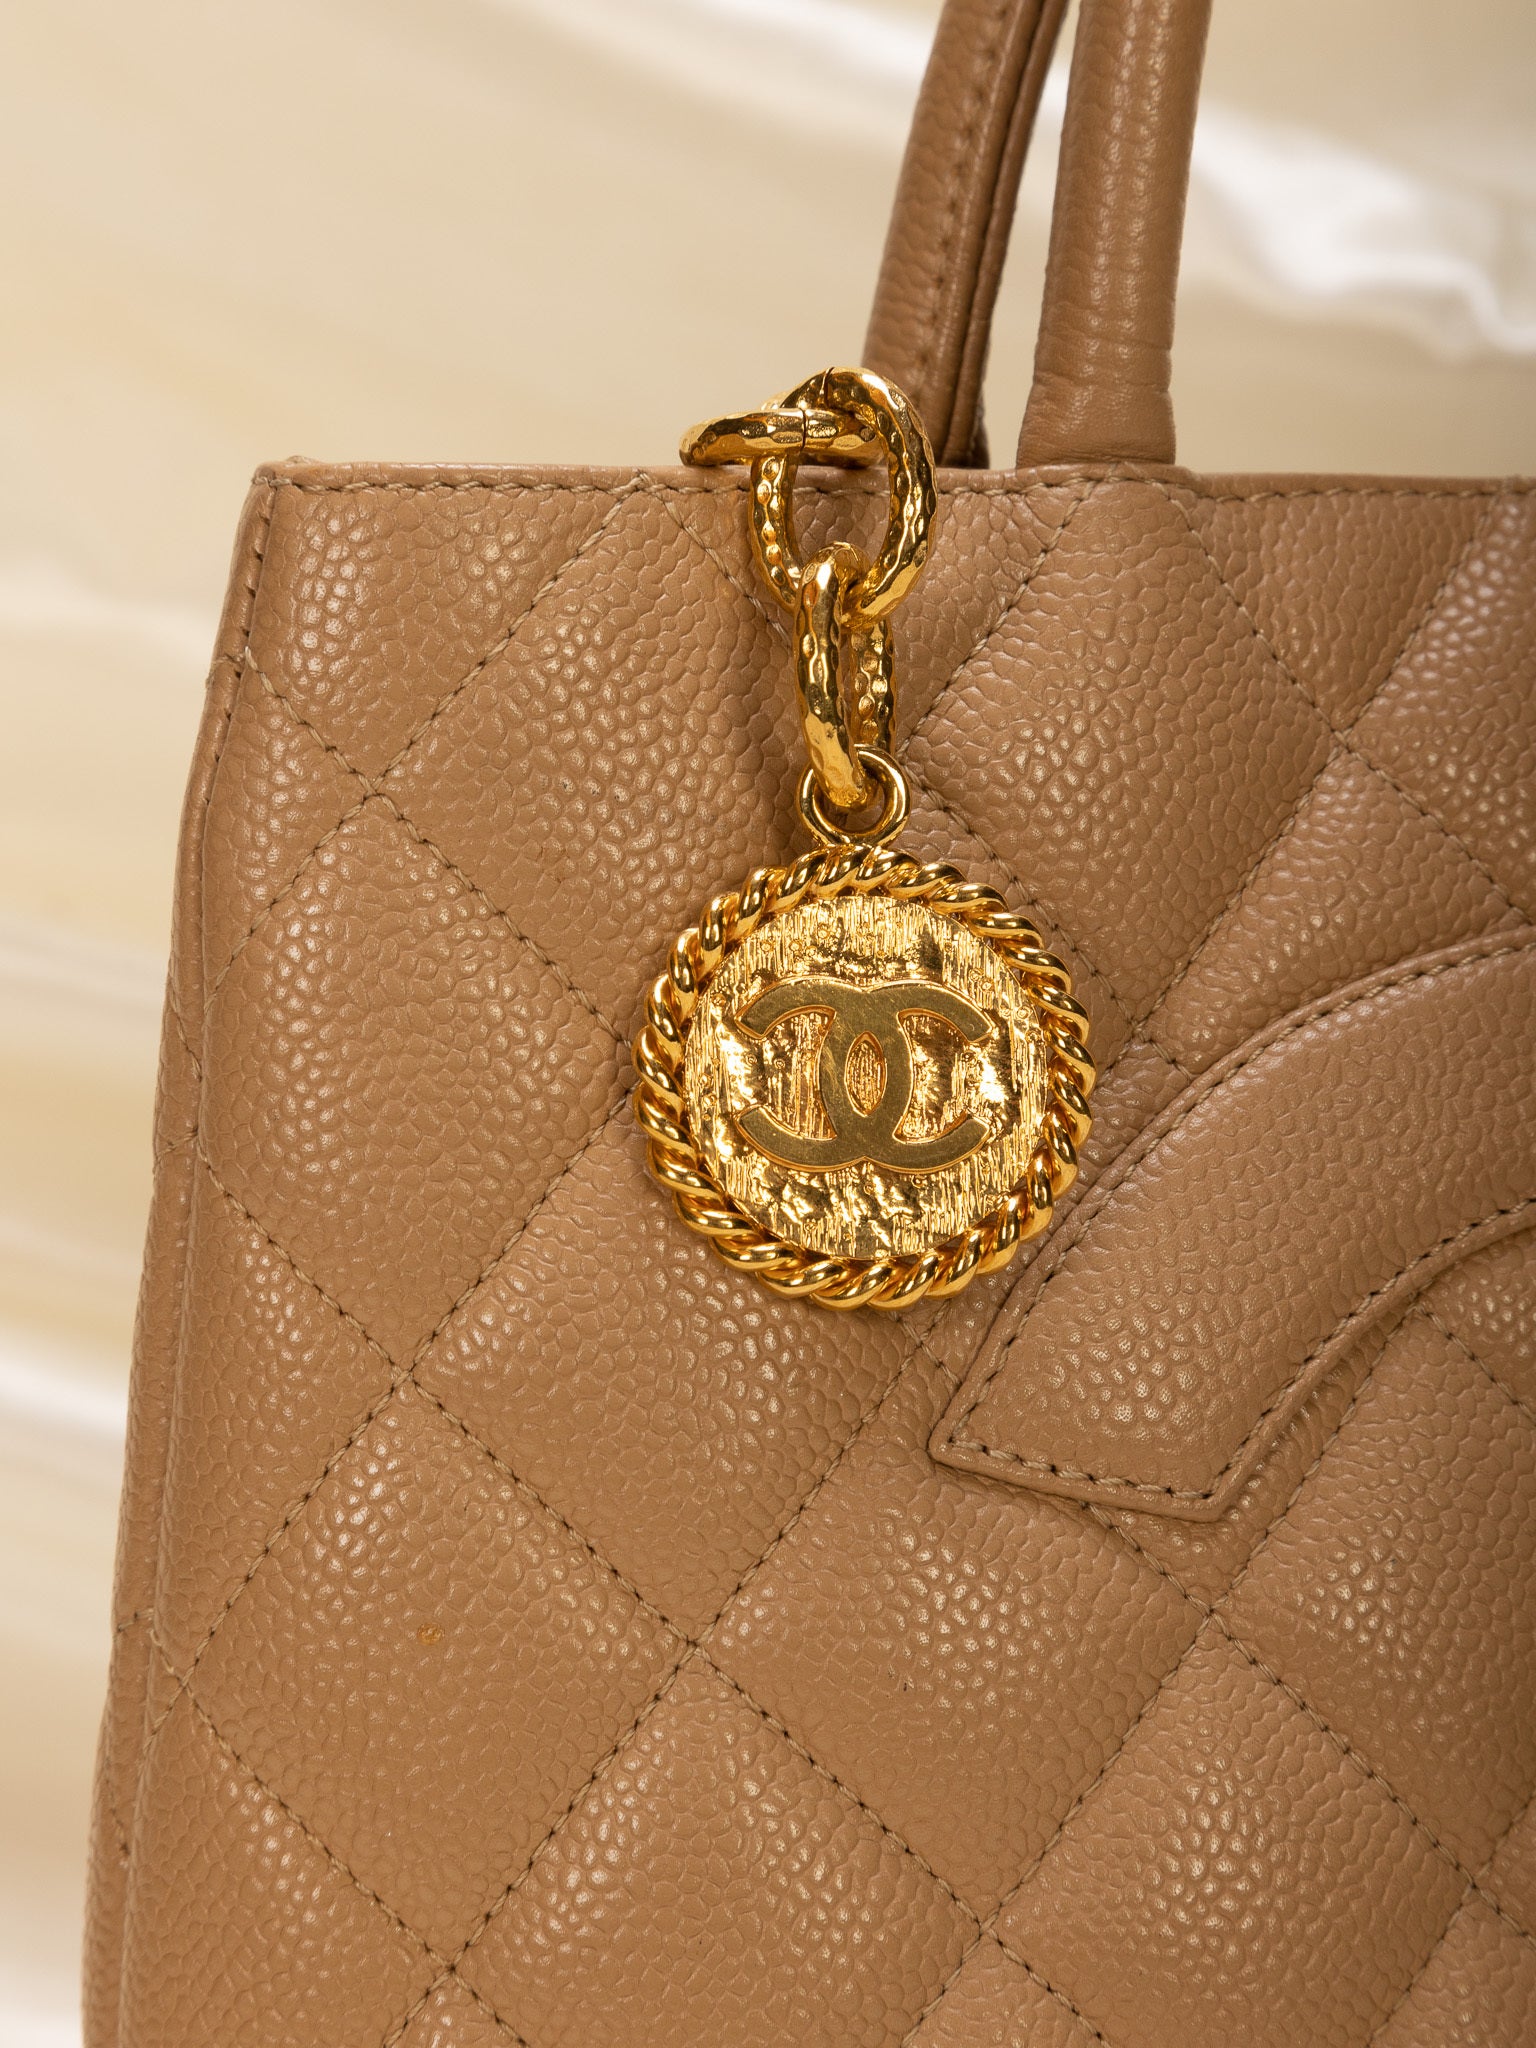 CHANEL, Bags, Chanel Classic Gold Medallion Cc Logo Quilted Caviar Tote  Bag Beige